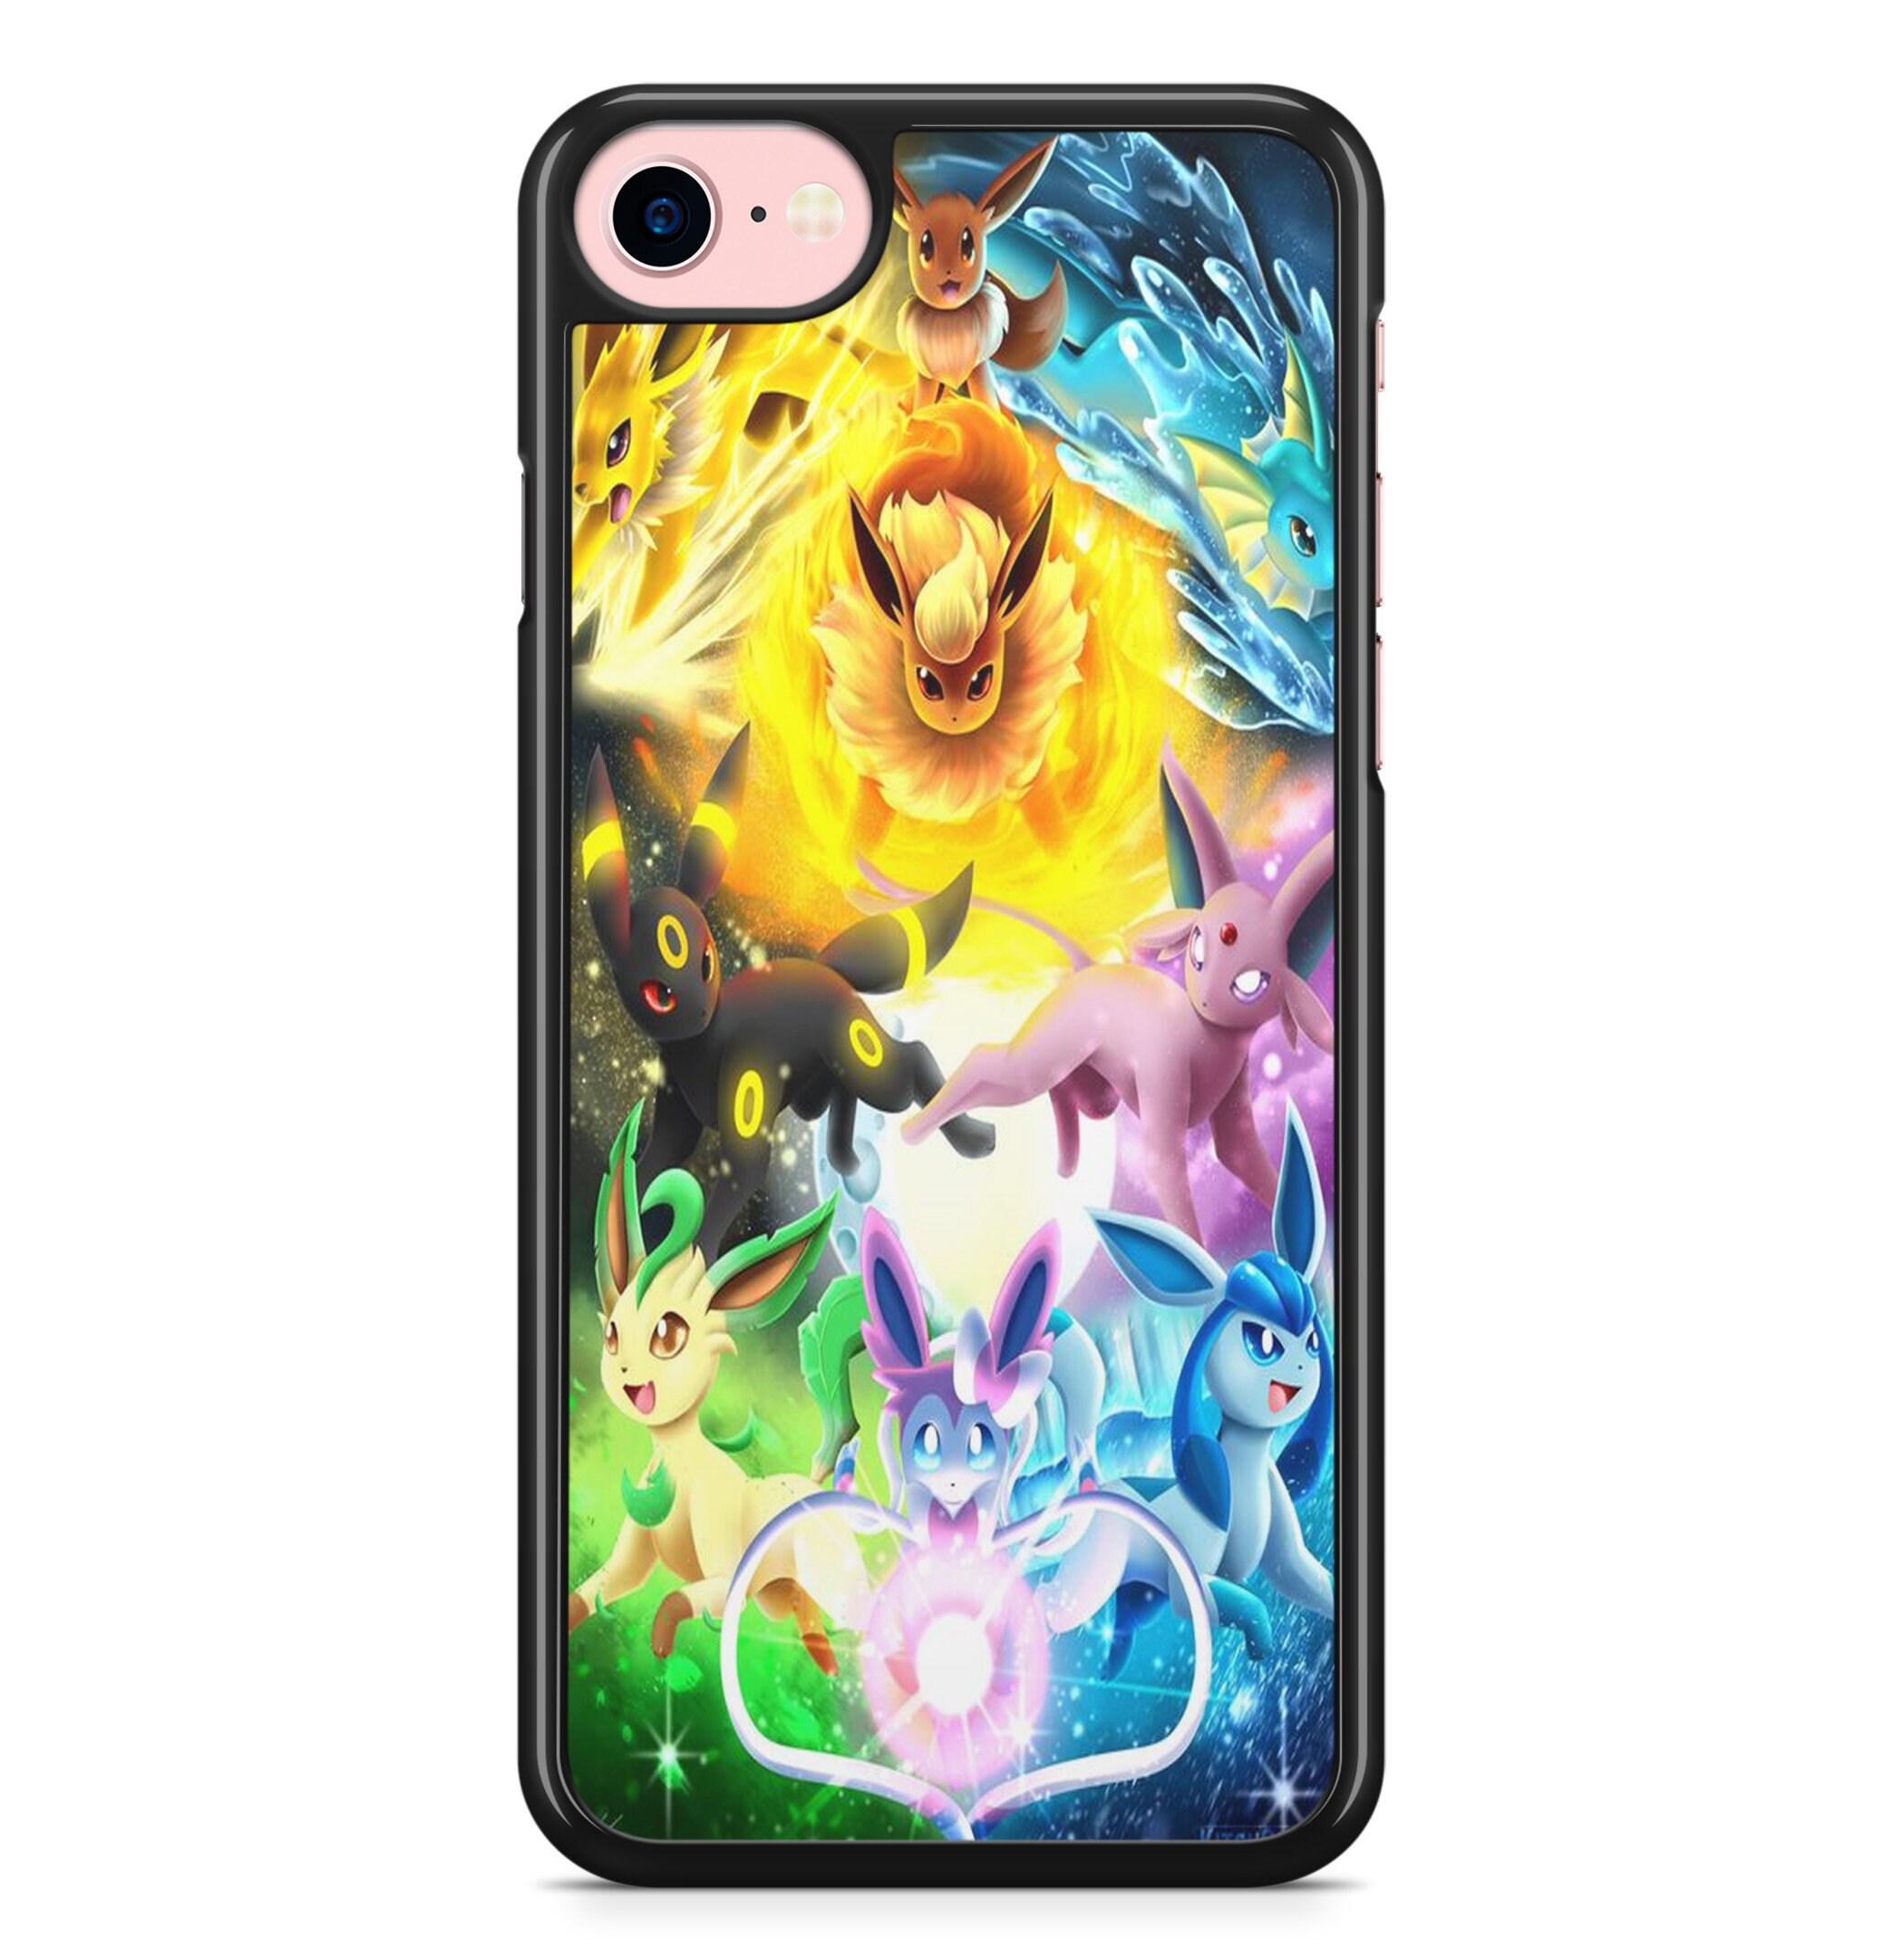 Coque iPhone 5 / 5s - Winter Holidays